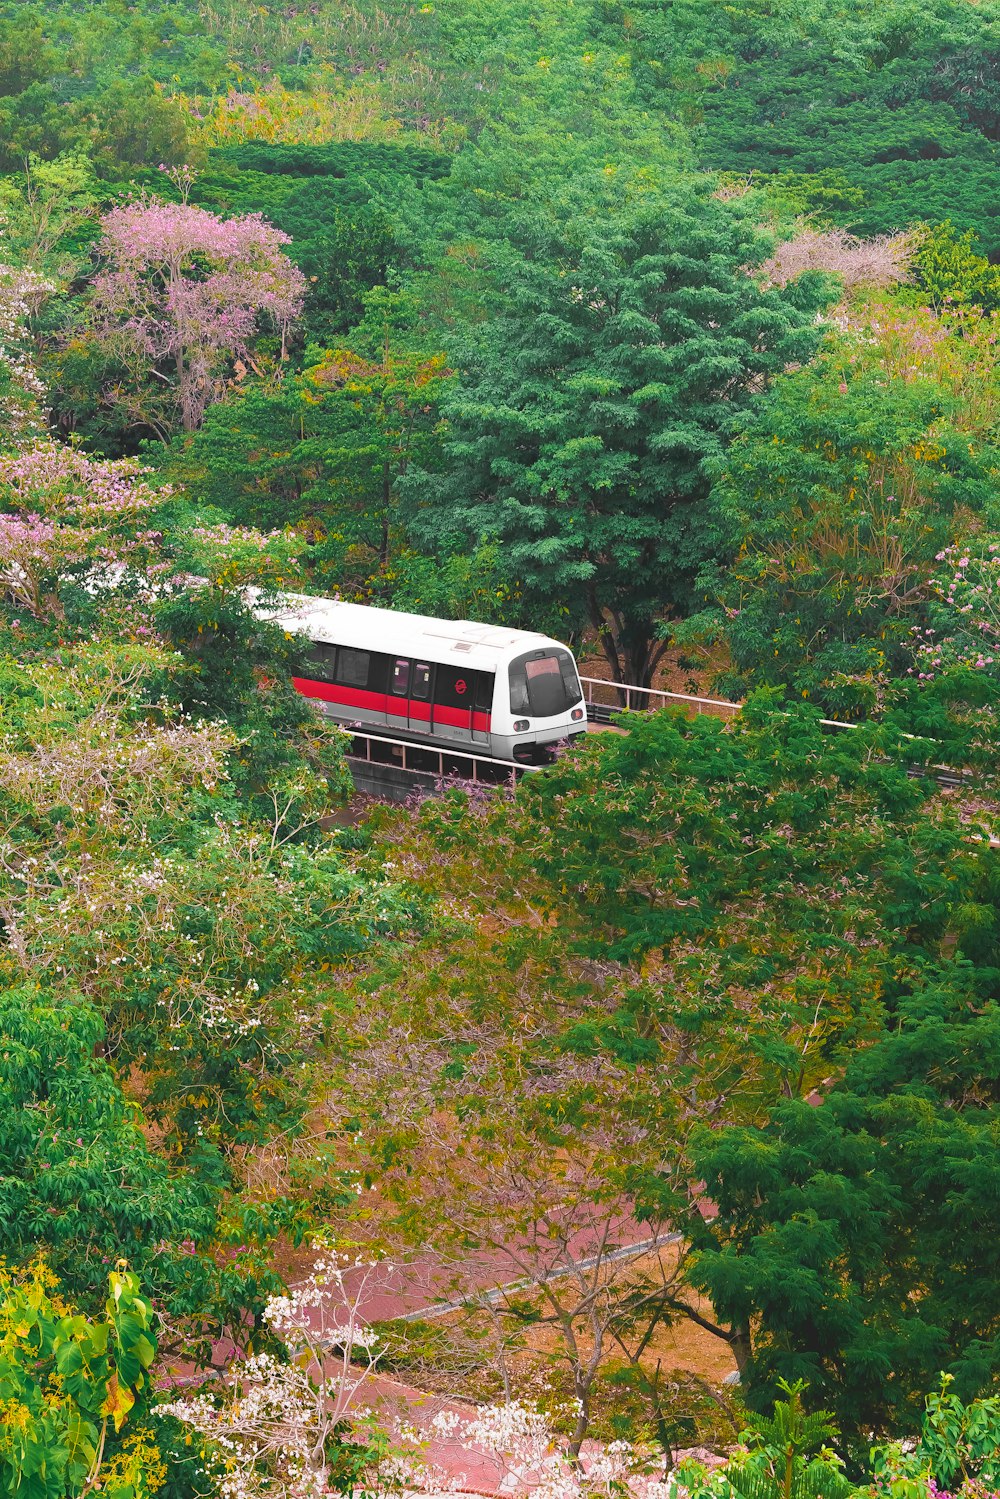 white and red train near trees